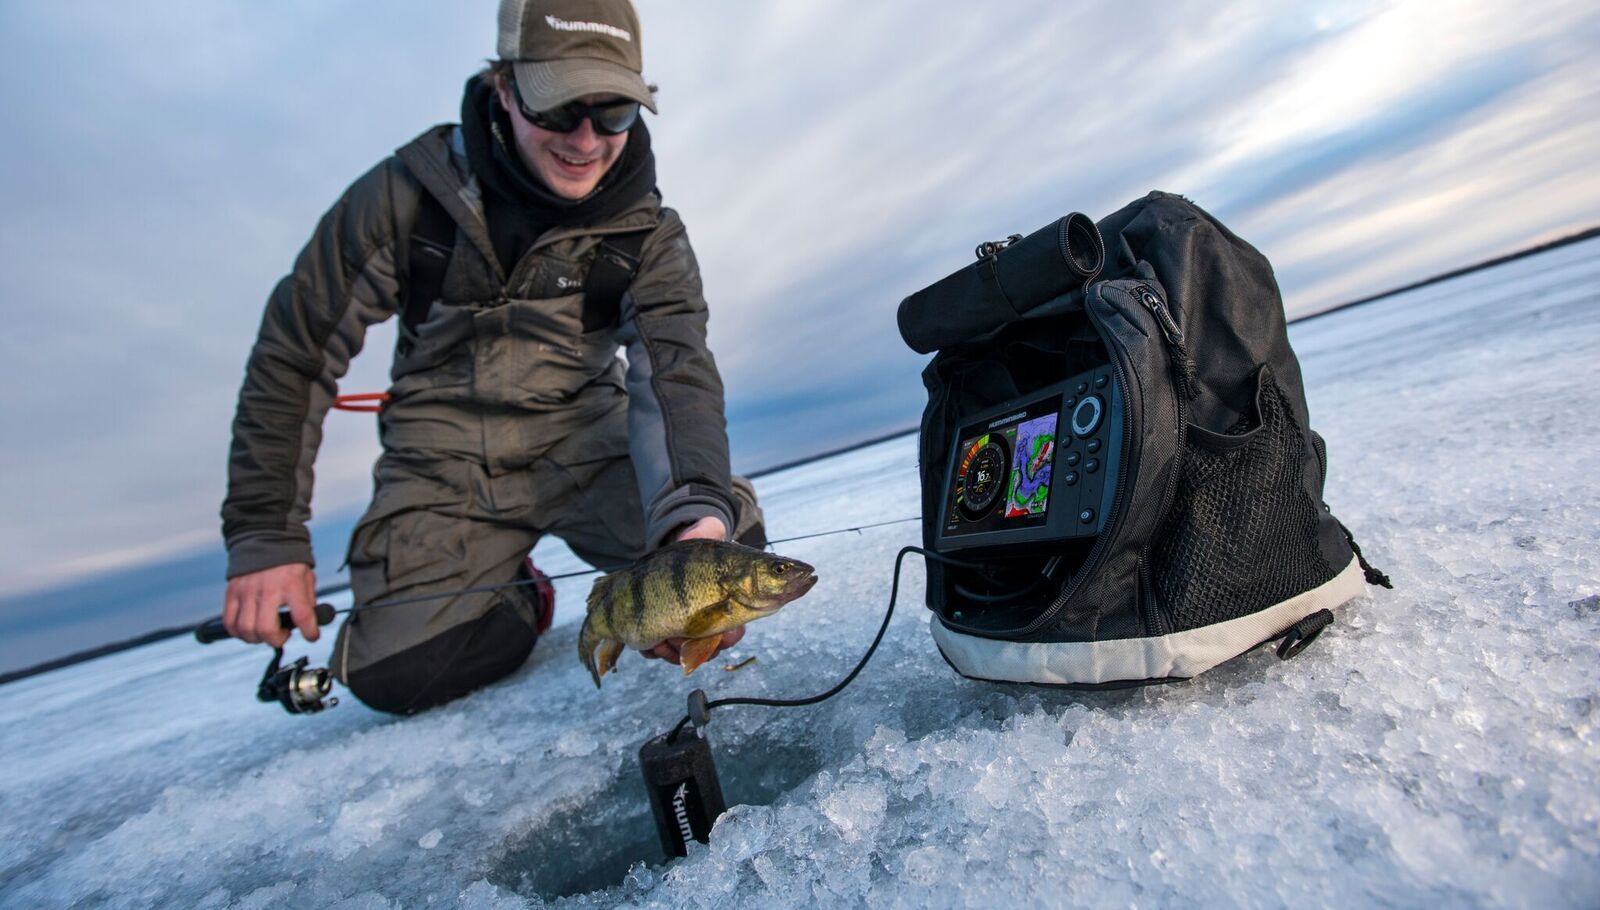 NEW HUMMINBIRD® ICE HELIX 5 AND 7 CHIRP GPS G2 SONAR UNITS GIVE ICE ANGLERS  HIGHER SCREEN RESOLUTION AND IMPROVED TARGET SEPARATION - Humminbird